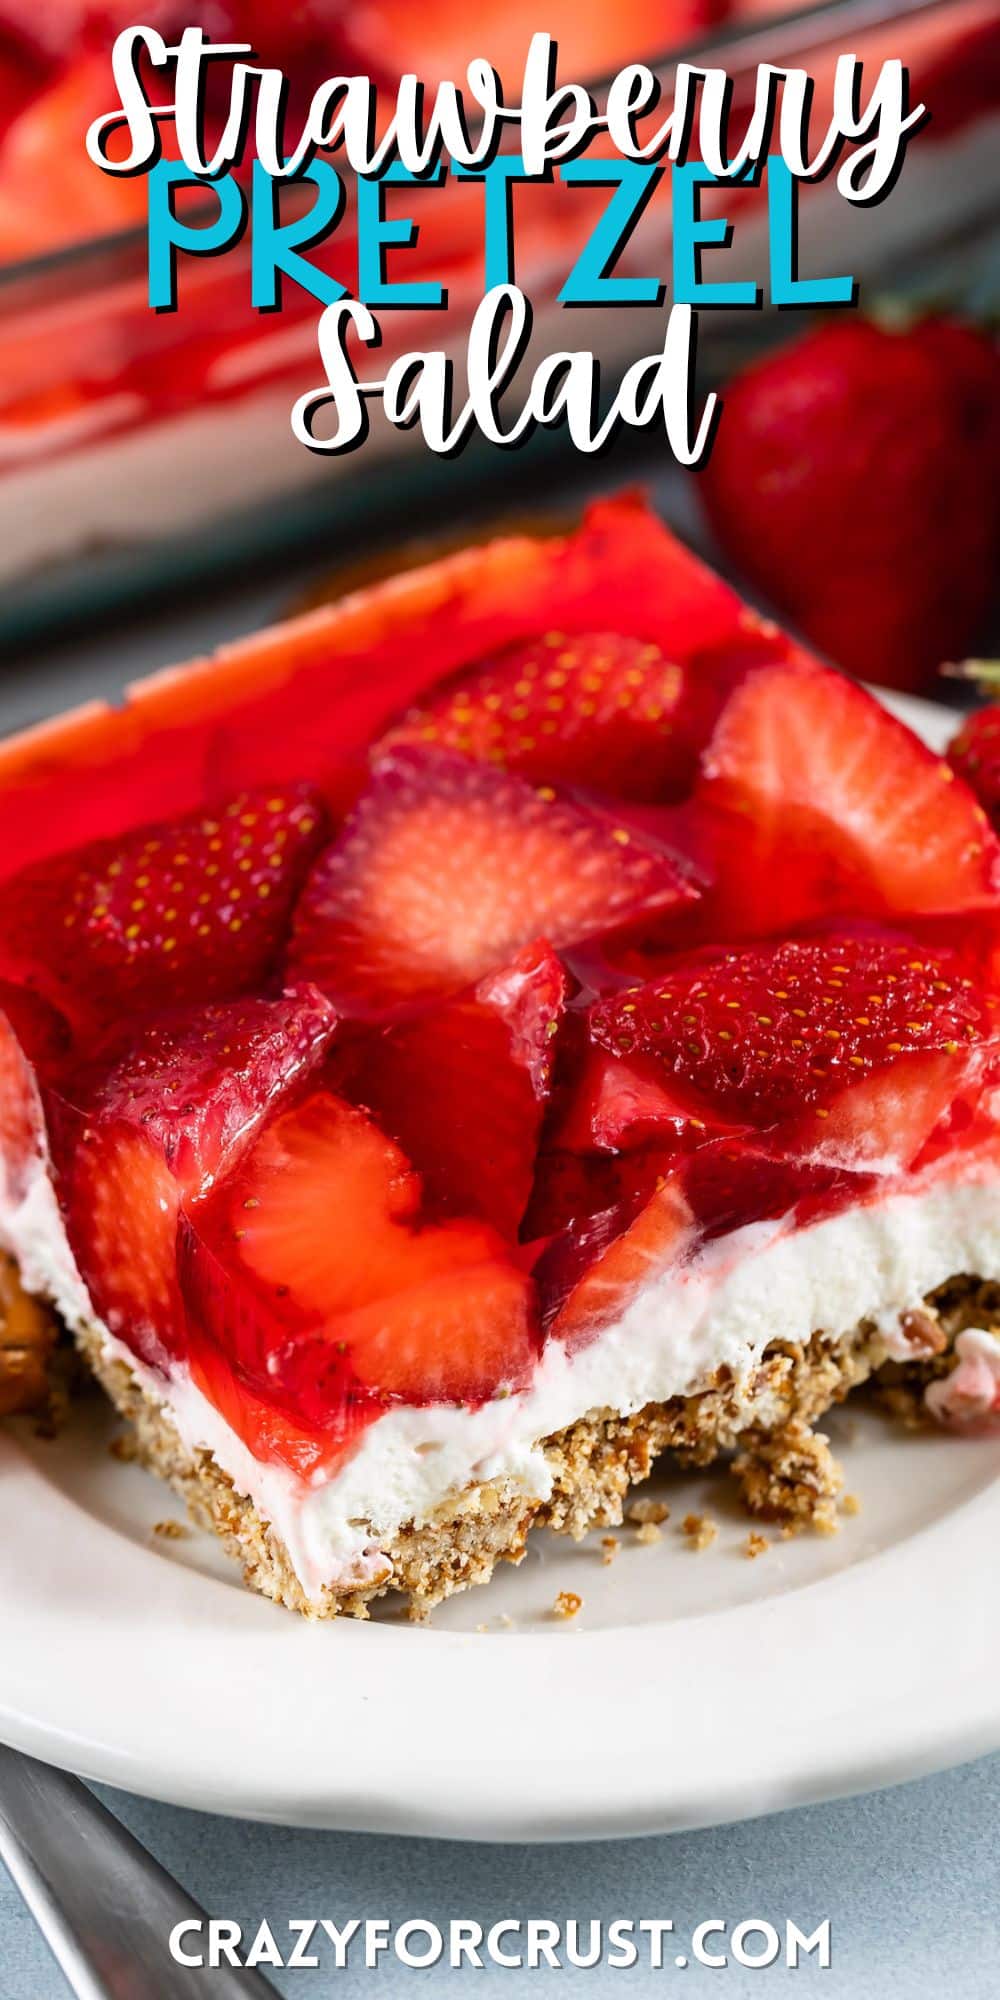 strawberries layered with crust and filling on a plate with words on the image.